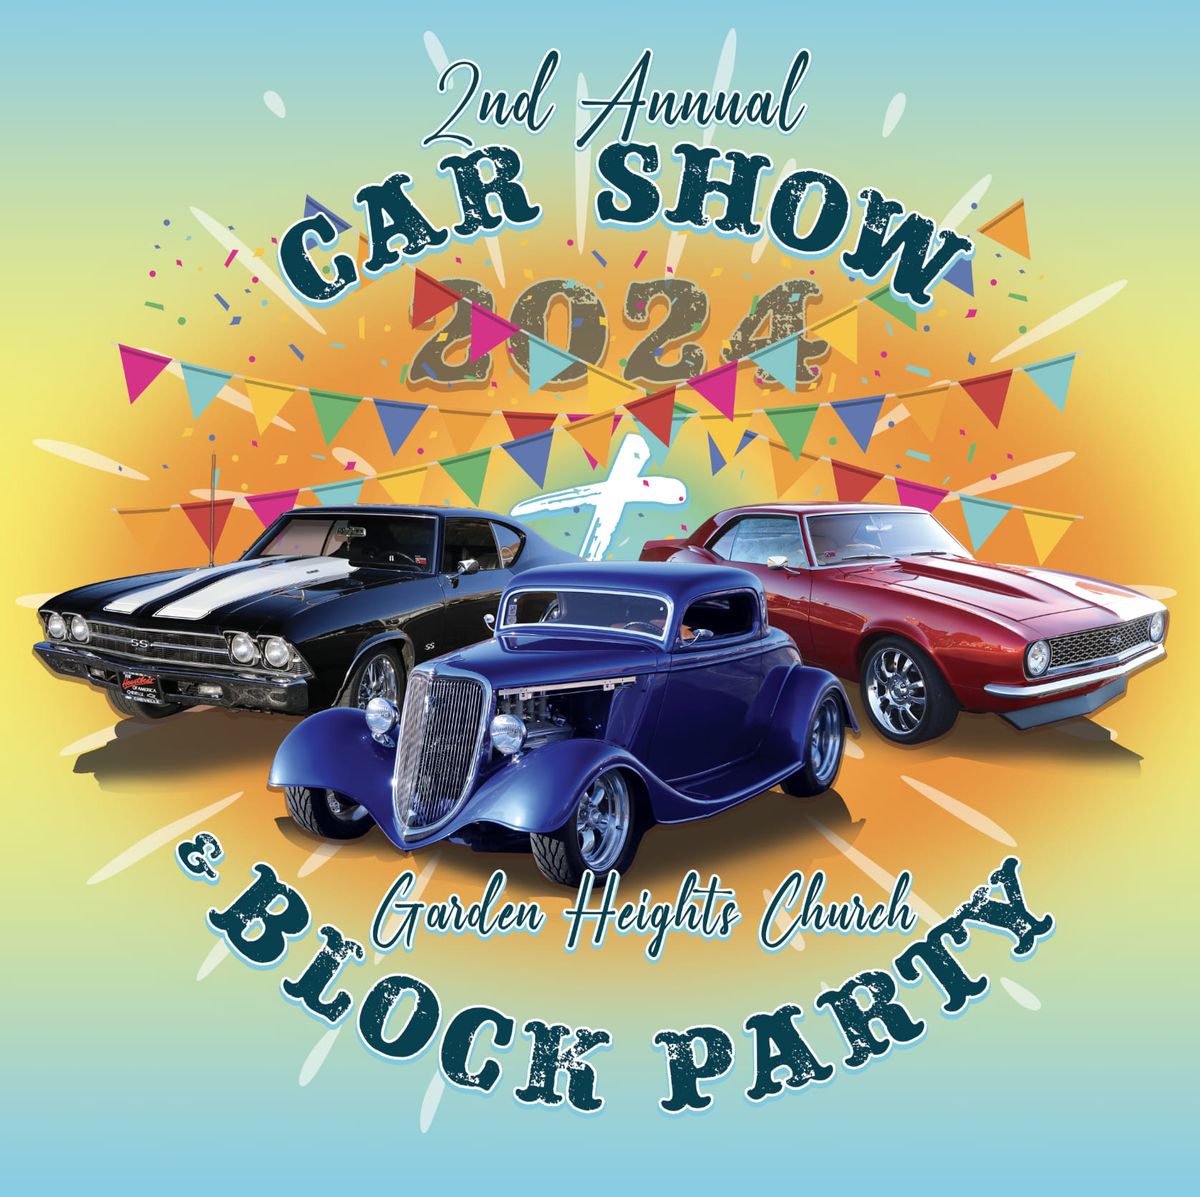 2nd Annual Garden Heights Car Show and Block Party 